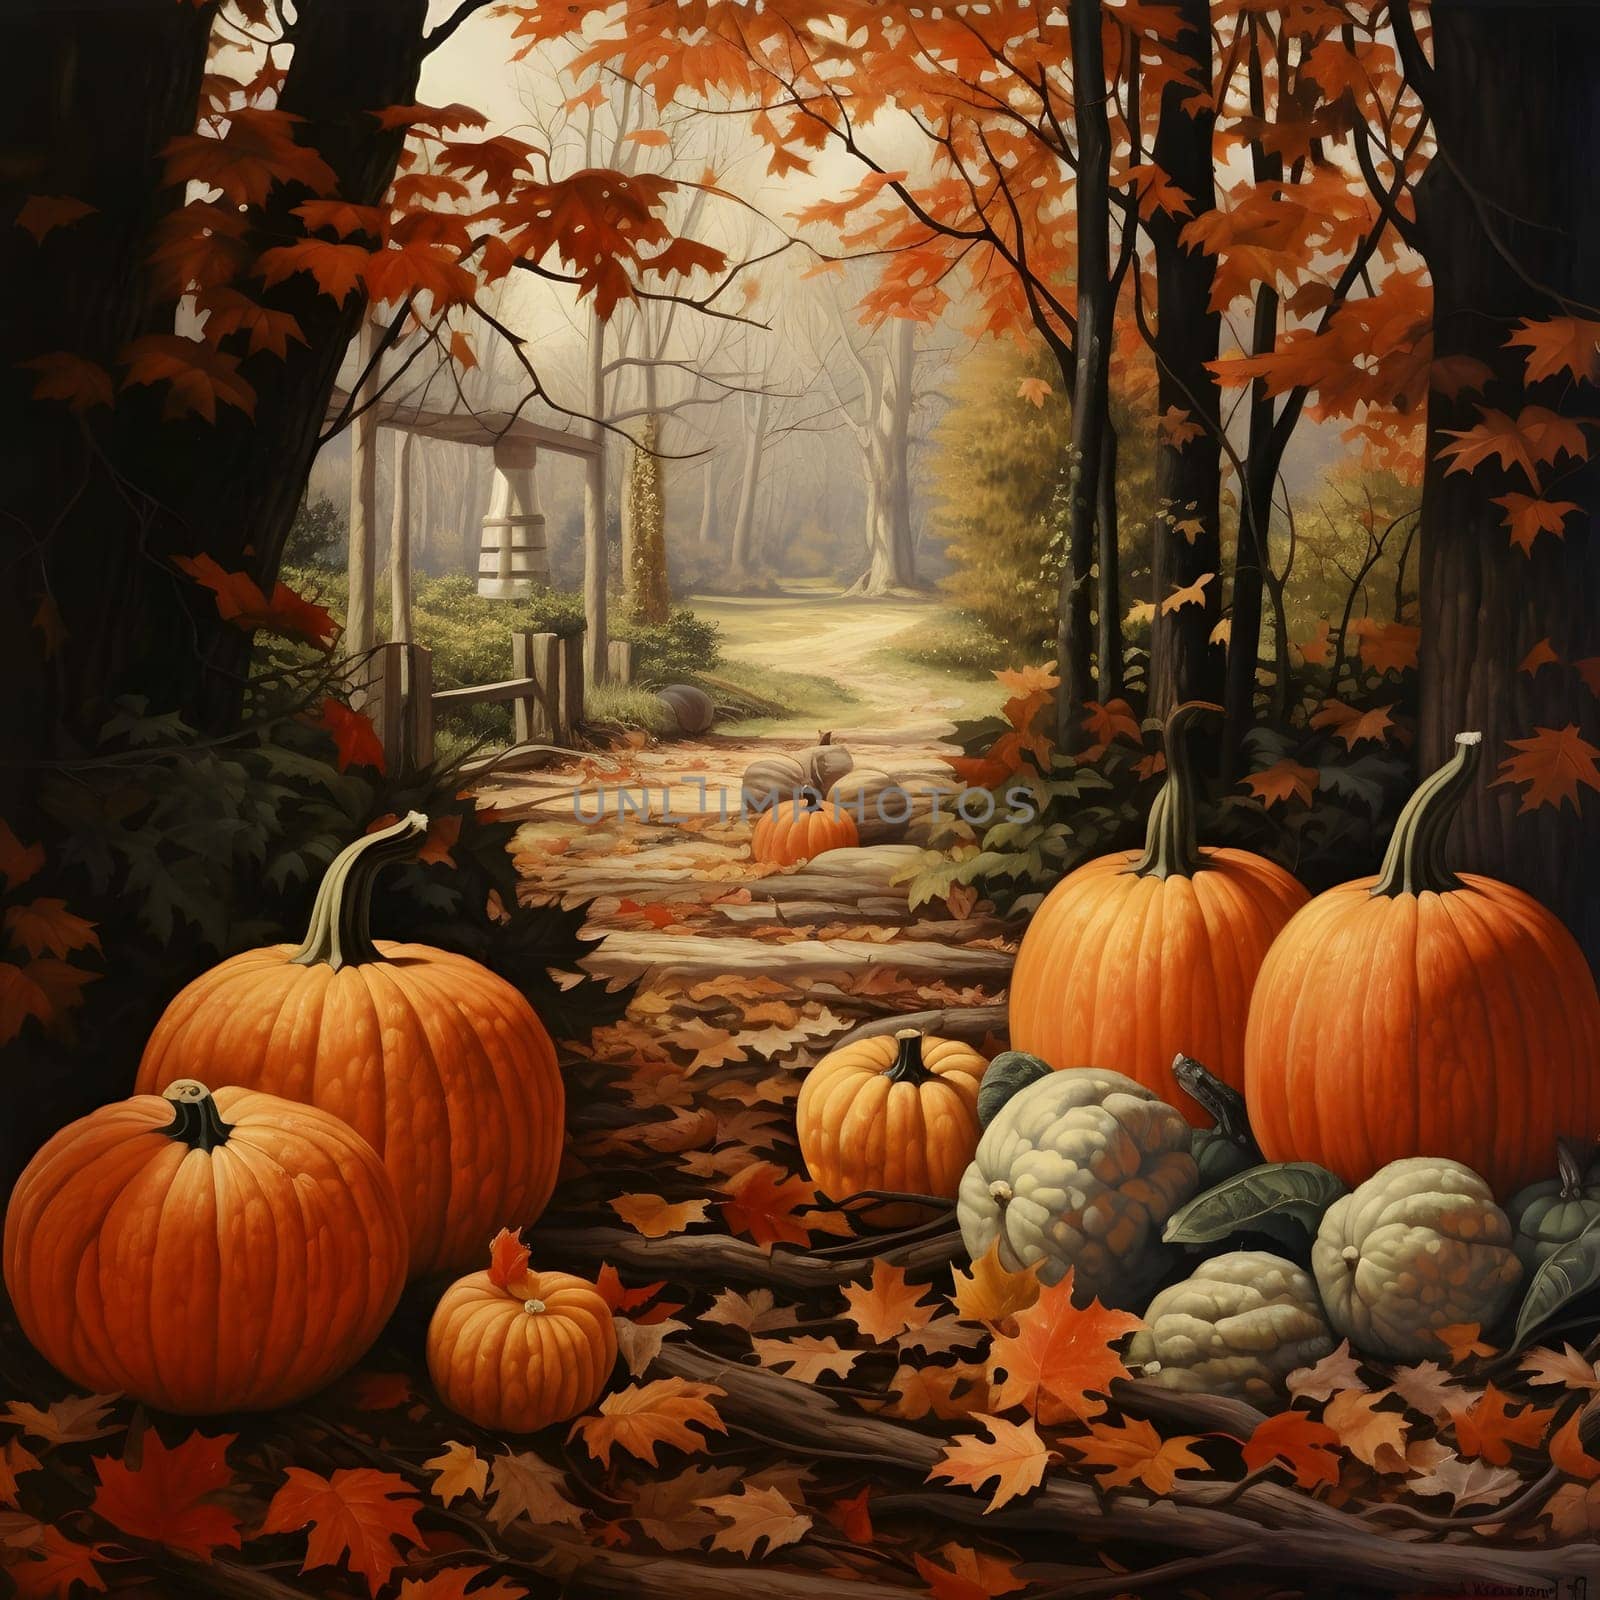 Illustration of pumpkins in the forest around the leaves. Pumpkin as a dish of thanksgiving for the harvest. The atmosphere of joy and celebration.